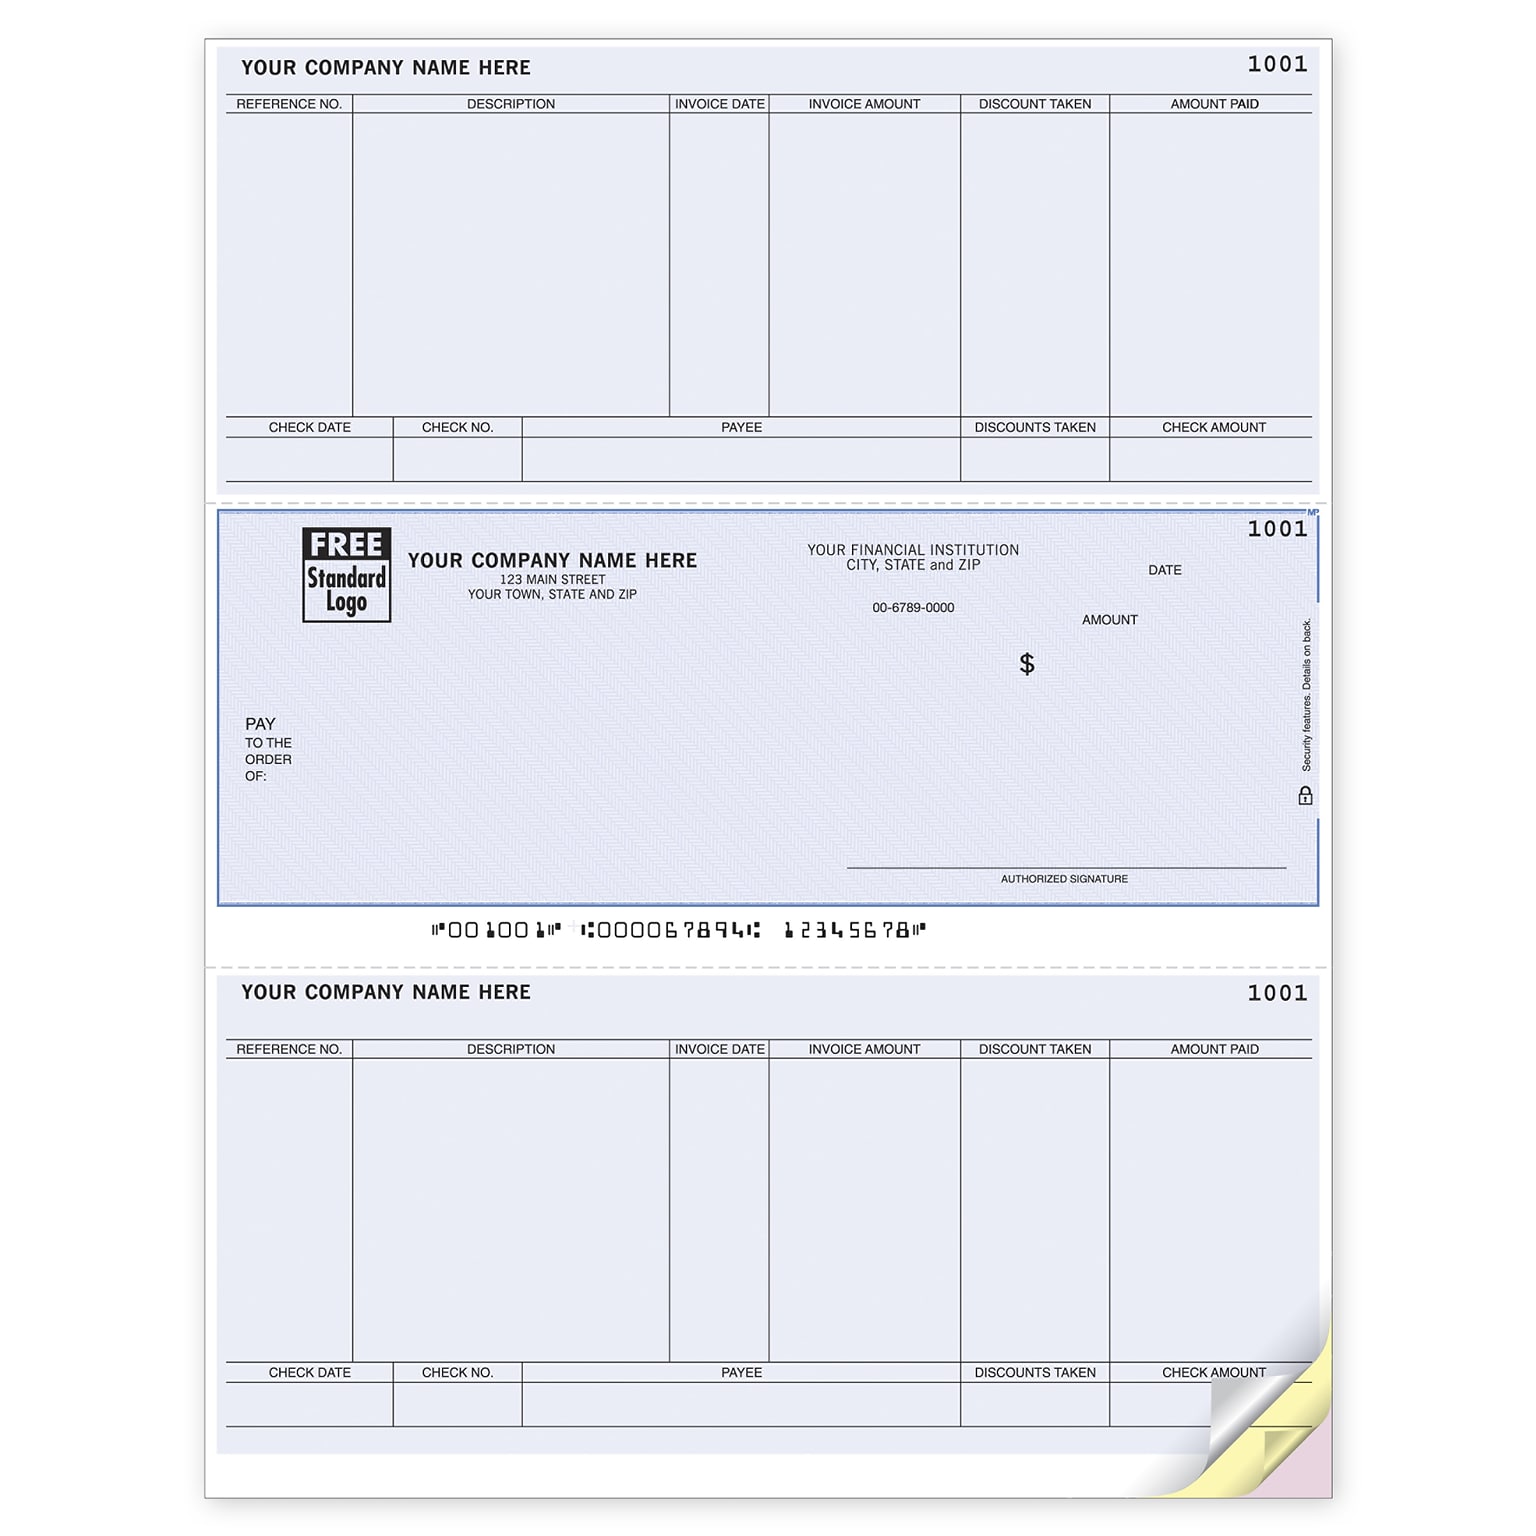 Custom Laser Middle Check, Accounts Payable, 3 Ply/Triplicate, 2 Color Printing, Standard Check Color, 8-1/2 x 11, 500/Pk